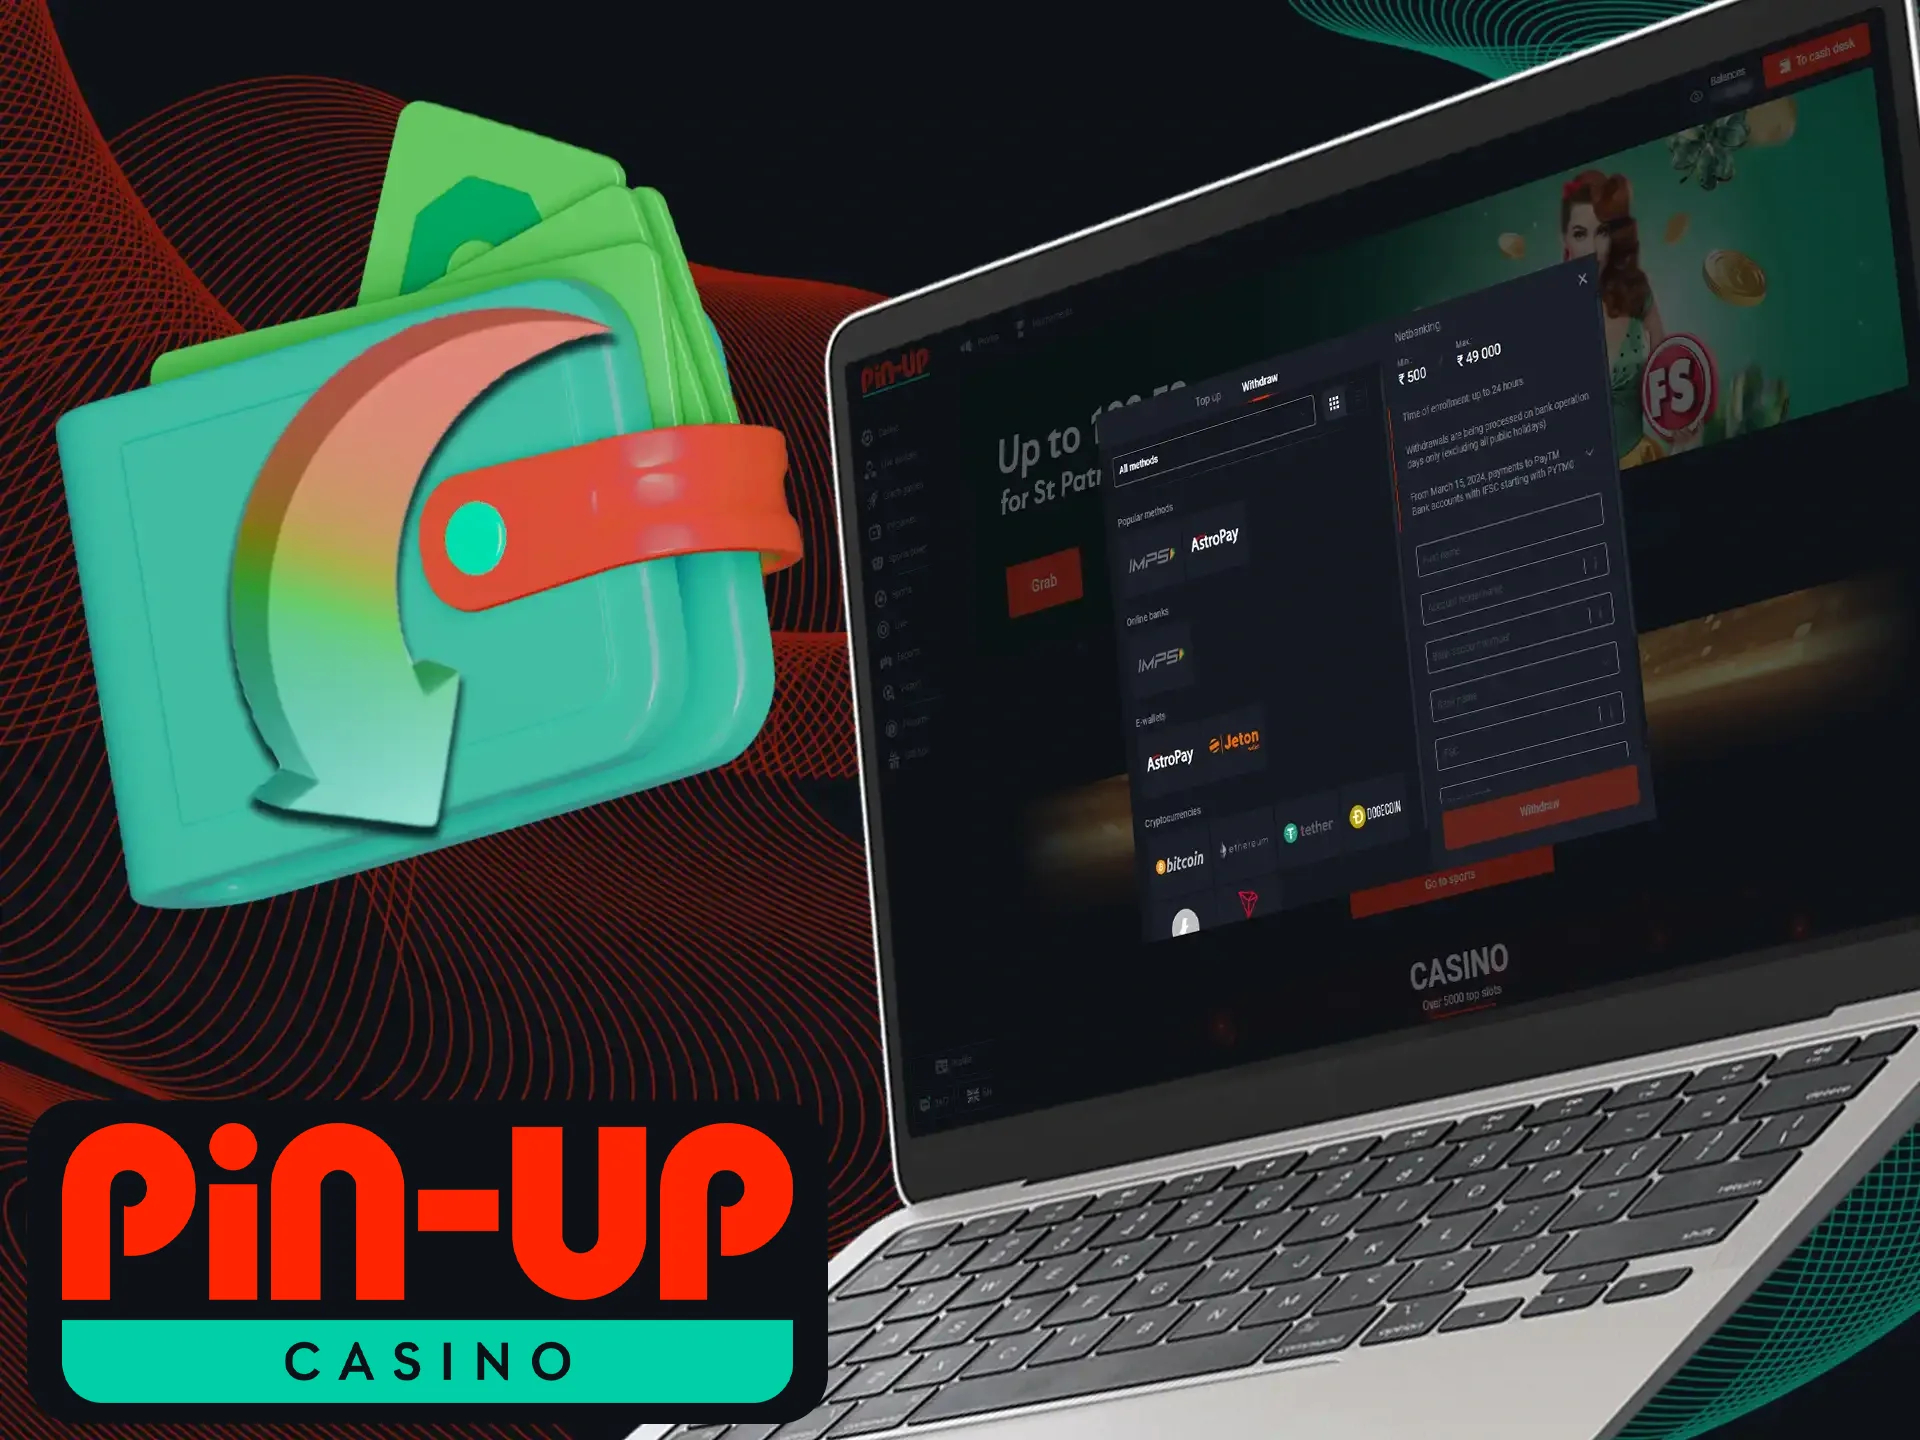 At Pin-Up Casino, you have the option to withdraw funds quickly and conveniently using a variety of methods.